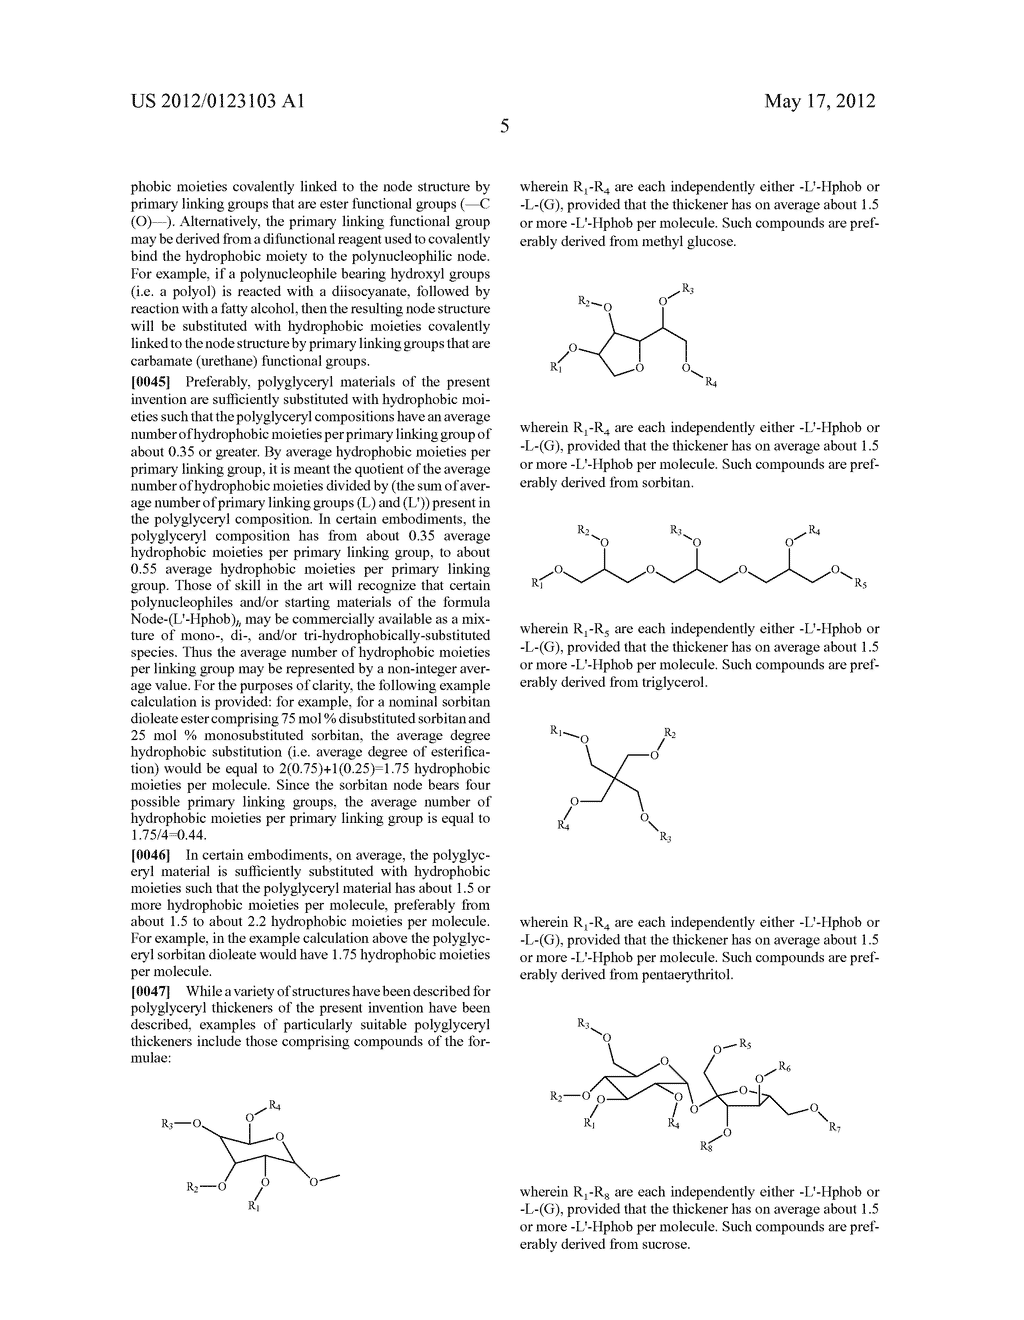 POLYGLYCERYL COMPOUNDS AND COMPOSITIONS - diagram, schematic, and image 10